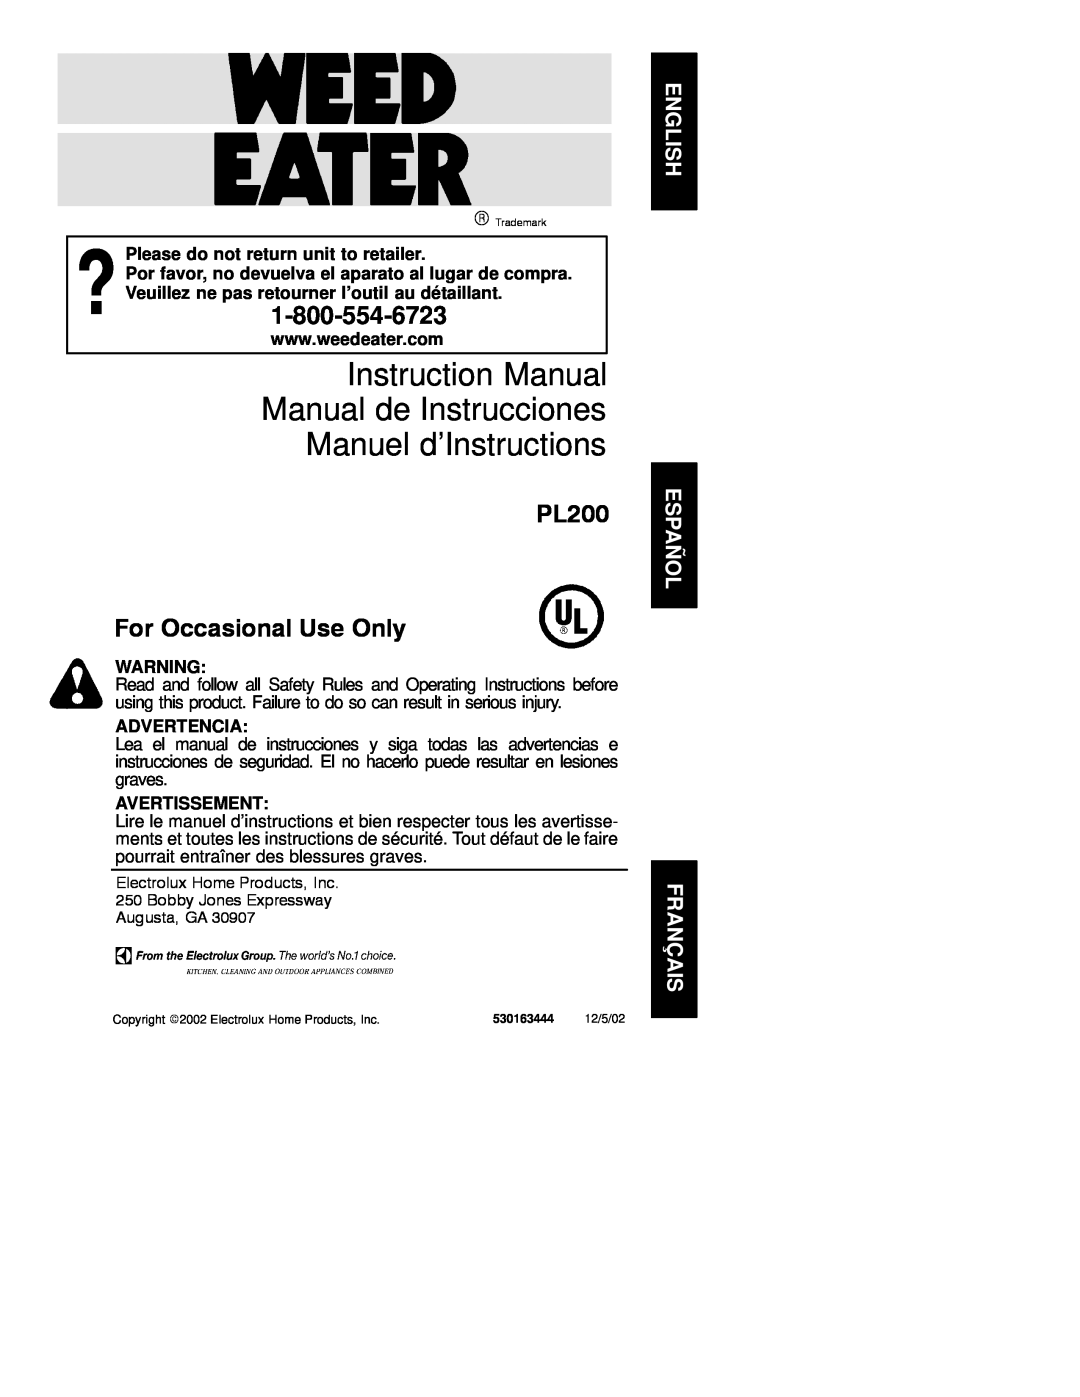 Weed Eater 530163444 instruction manual Please do not return unit to retailer, Advertencia, Avertissement 